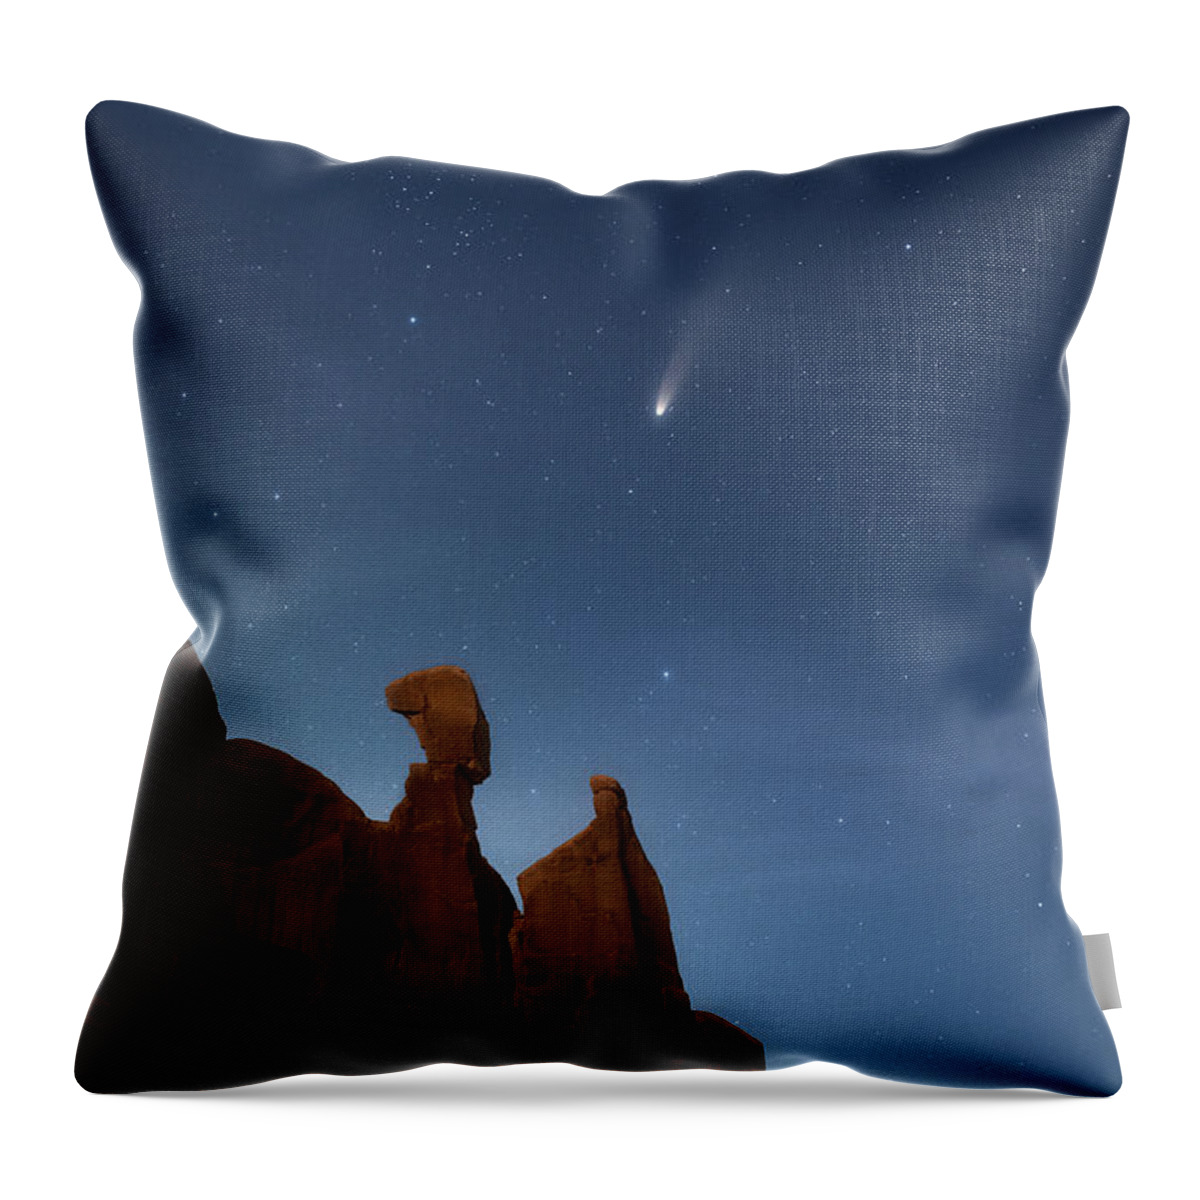 Comet Neowise Throw Pillow featuring the photograph Nefertiti's Wish by Darren White